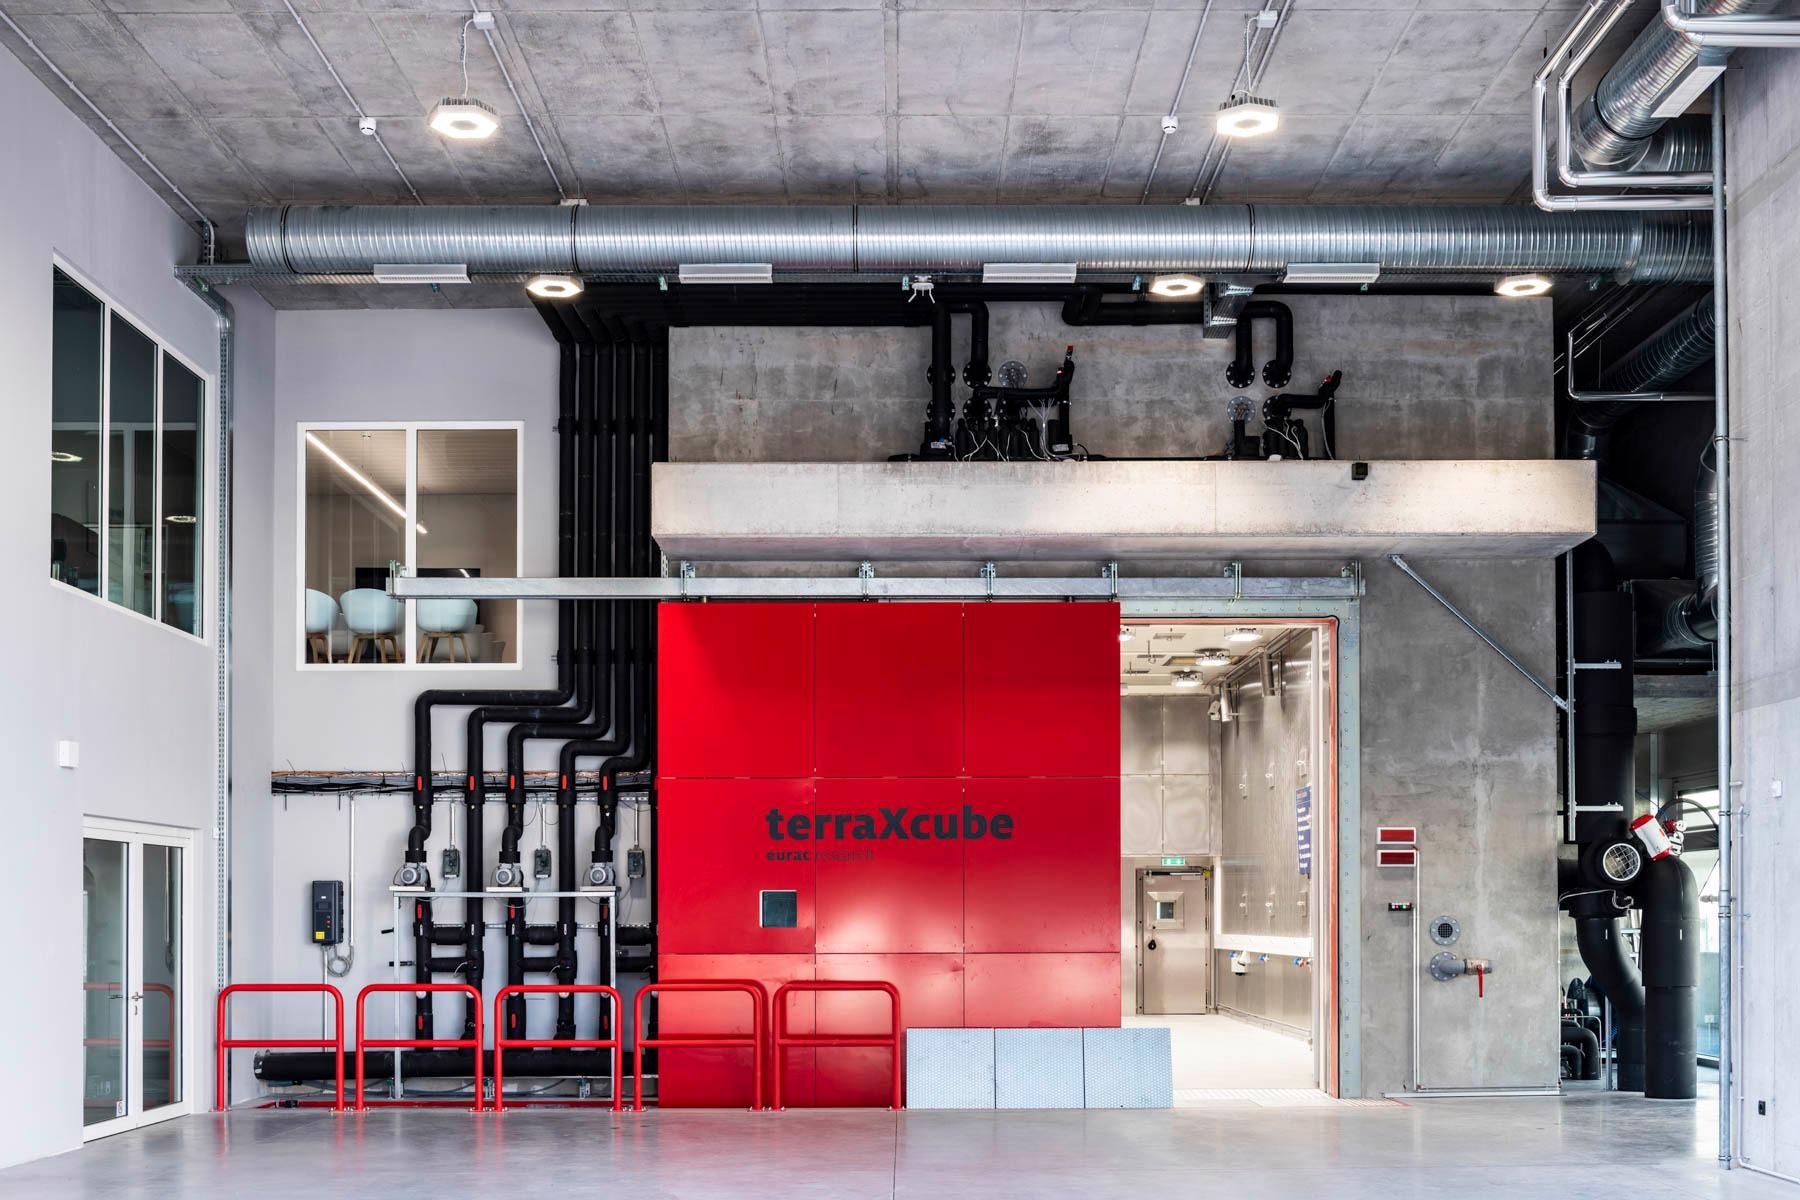 Gas Sensors Safeguard Research Work in the Extreme Climate Simulator in Bolzano, Italy